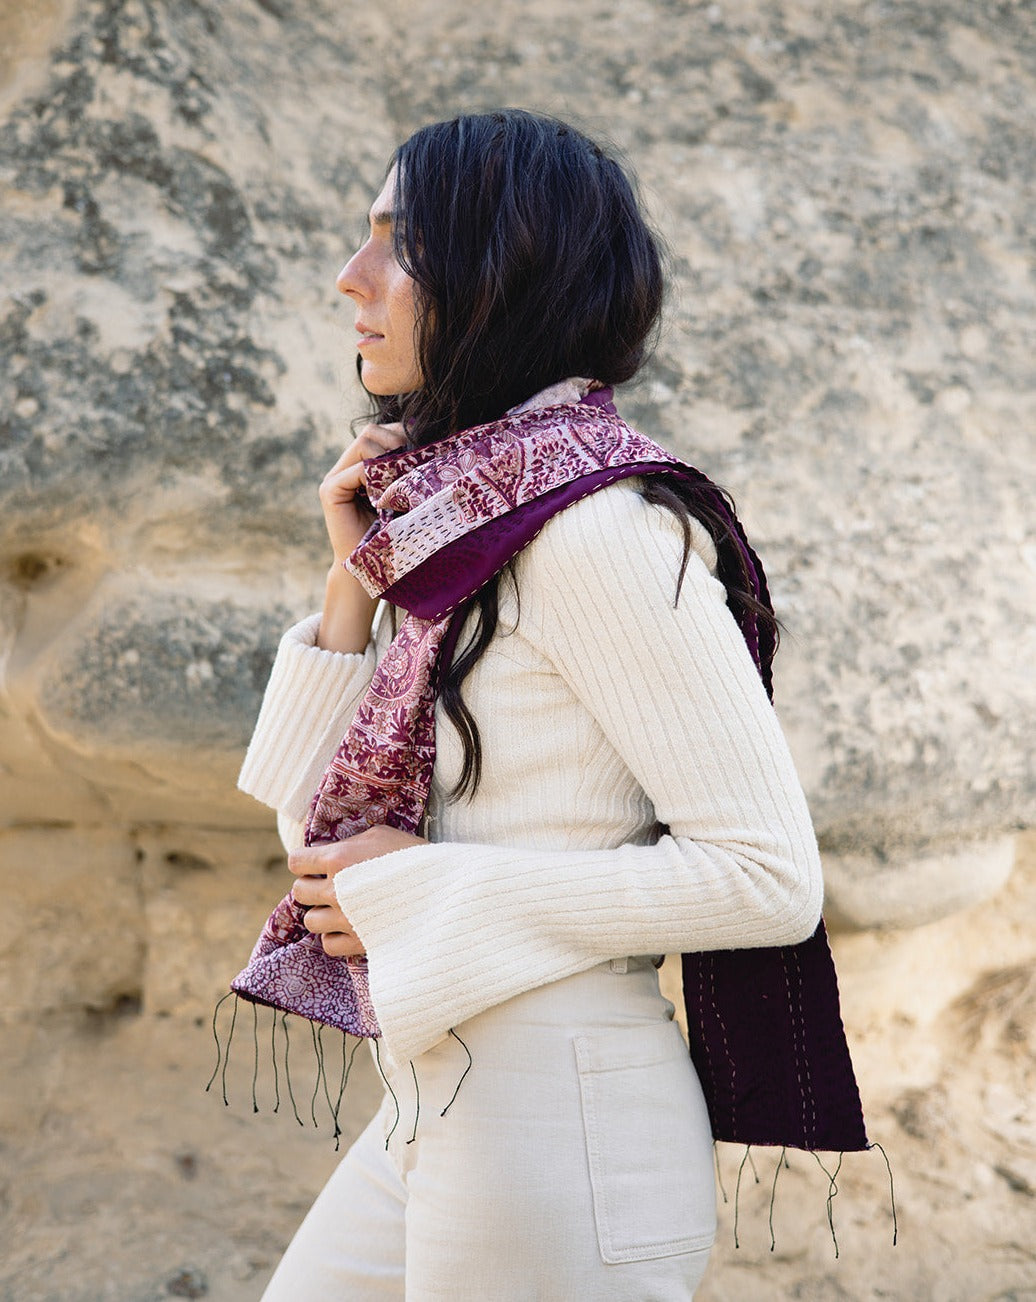 The Classic Kantha Scarf in the Mixed Berry Palette